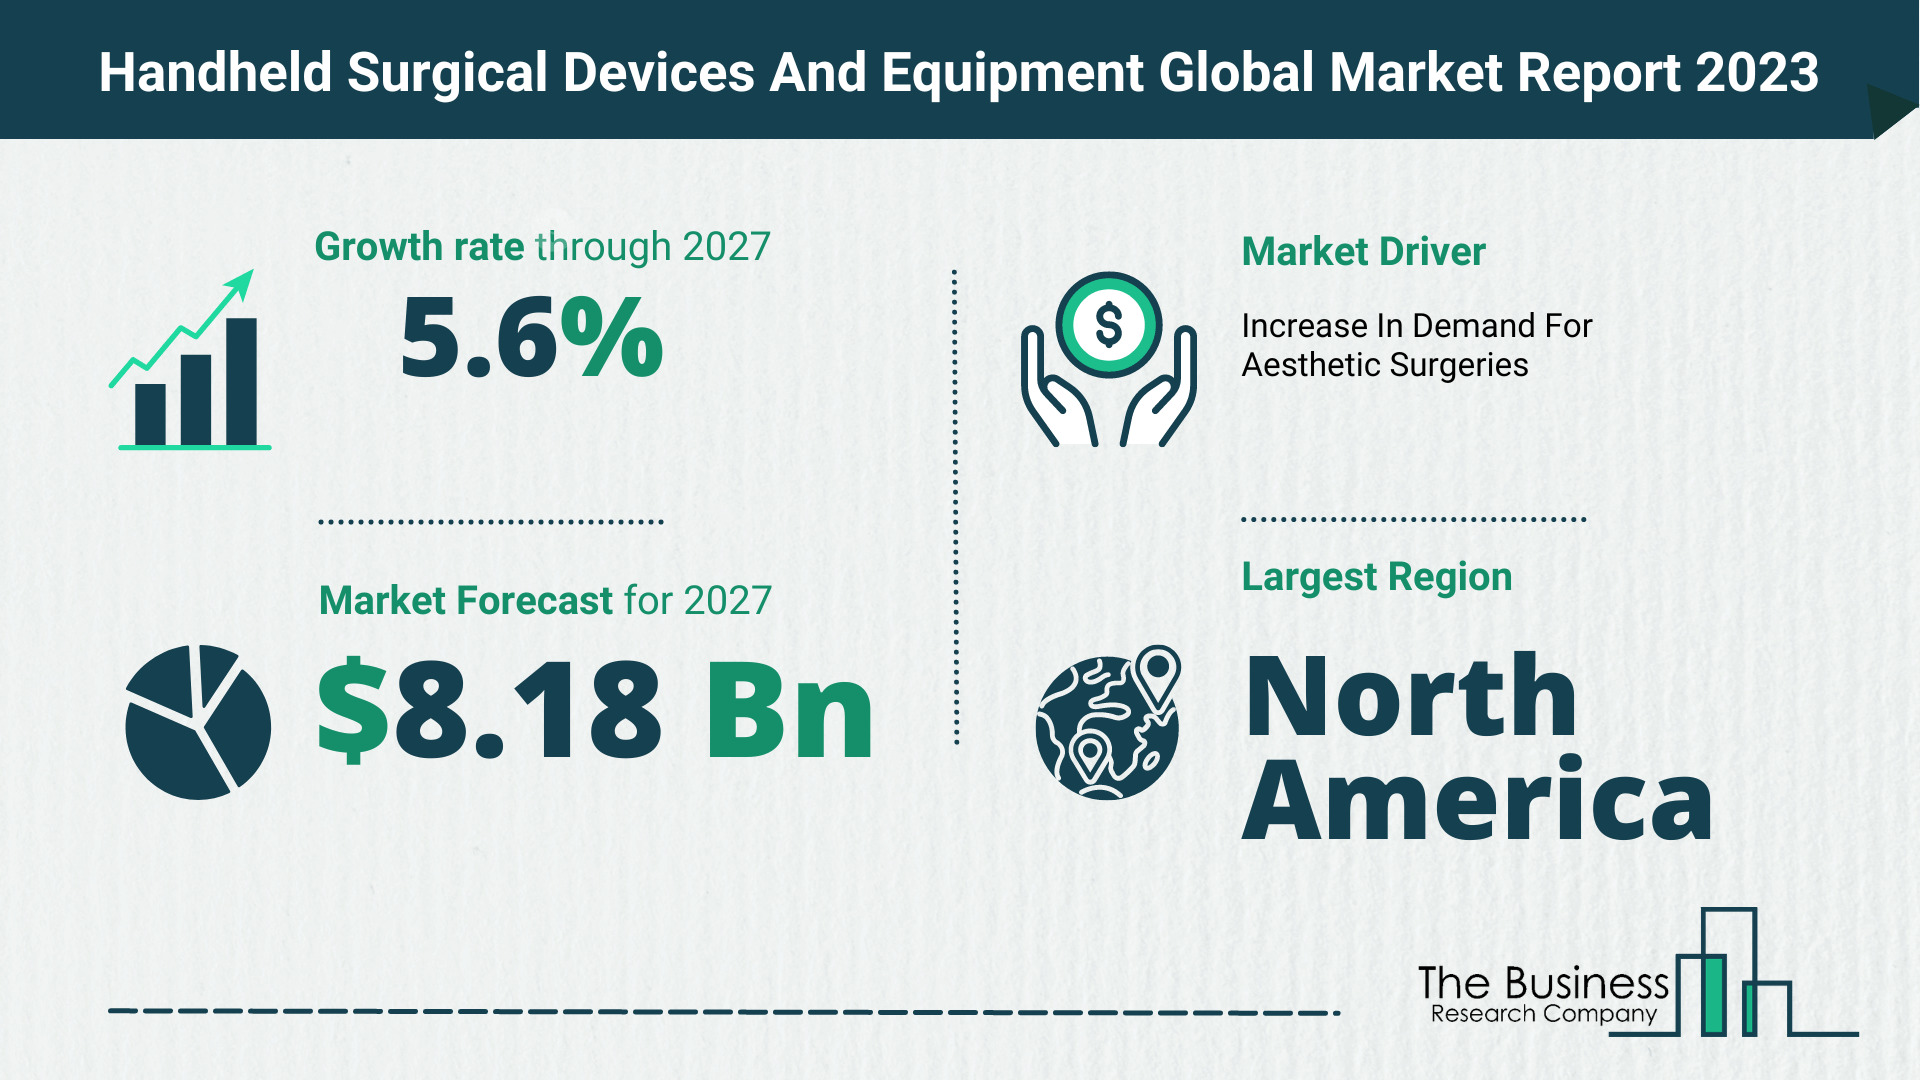 Global Handheld Surgical Devices And Equipment Market